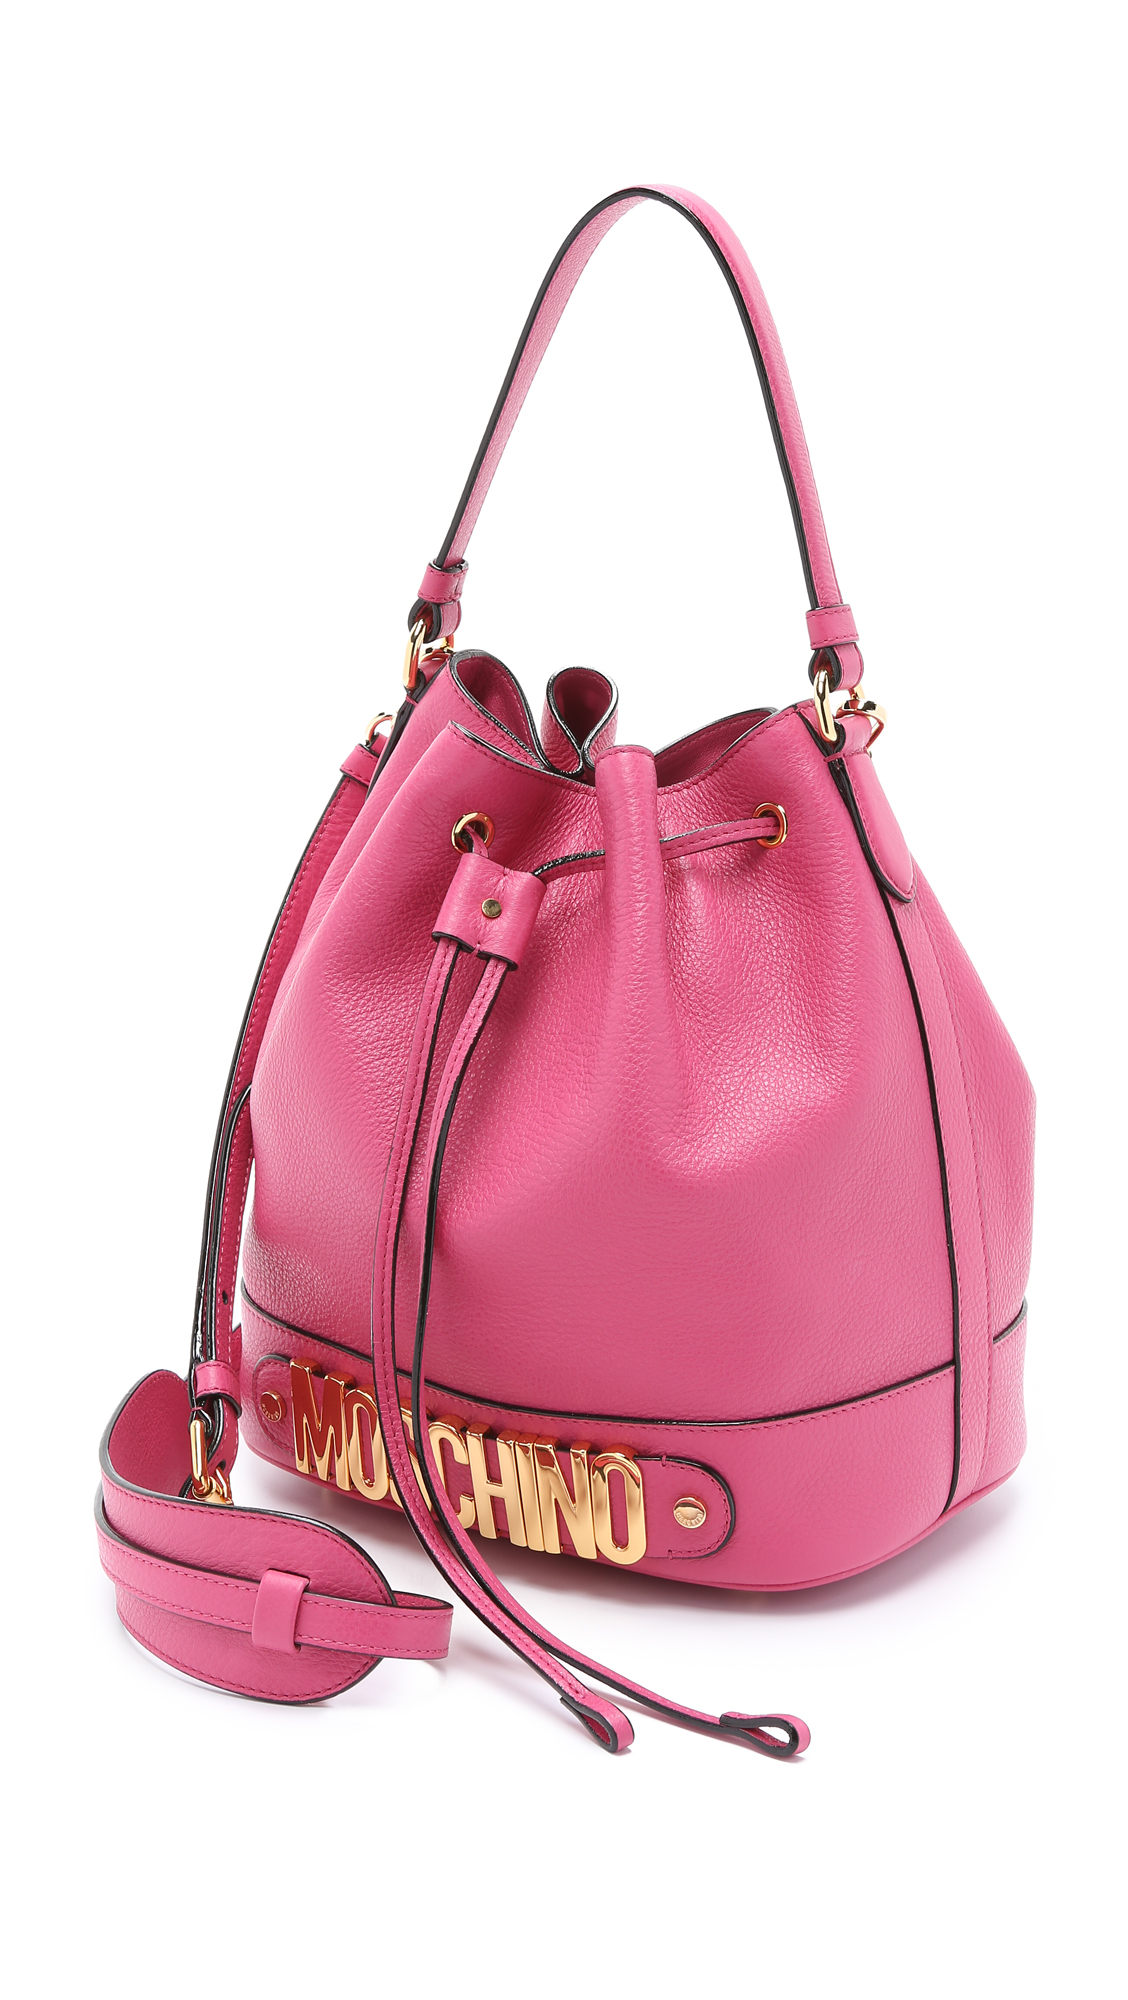 Moschino Leather Bucket Bag - Pink - Lyst